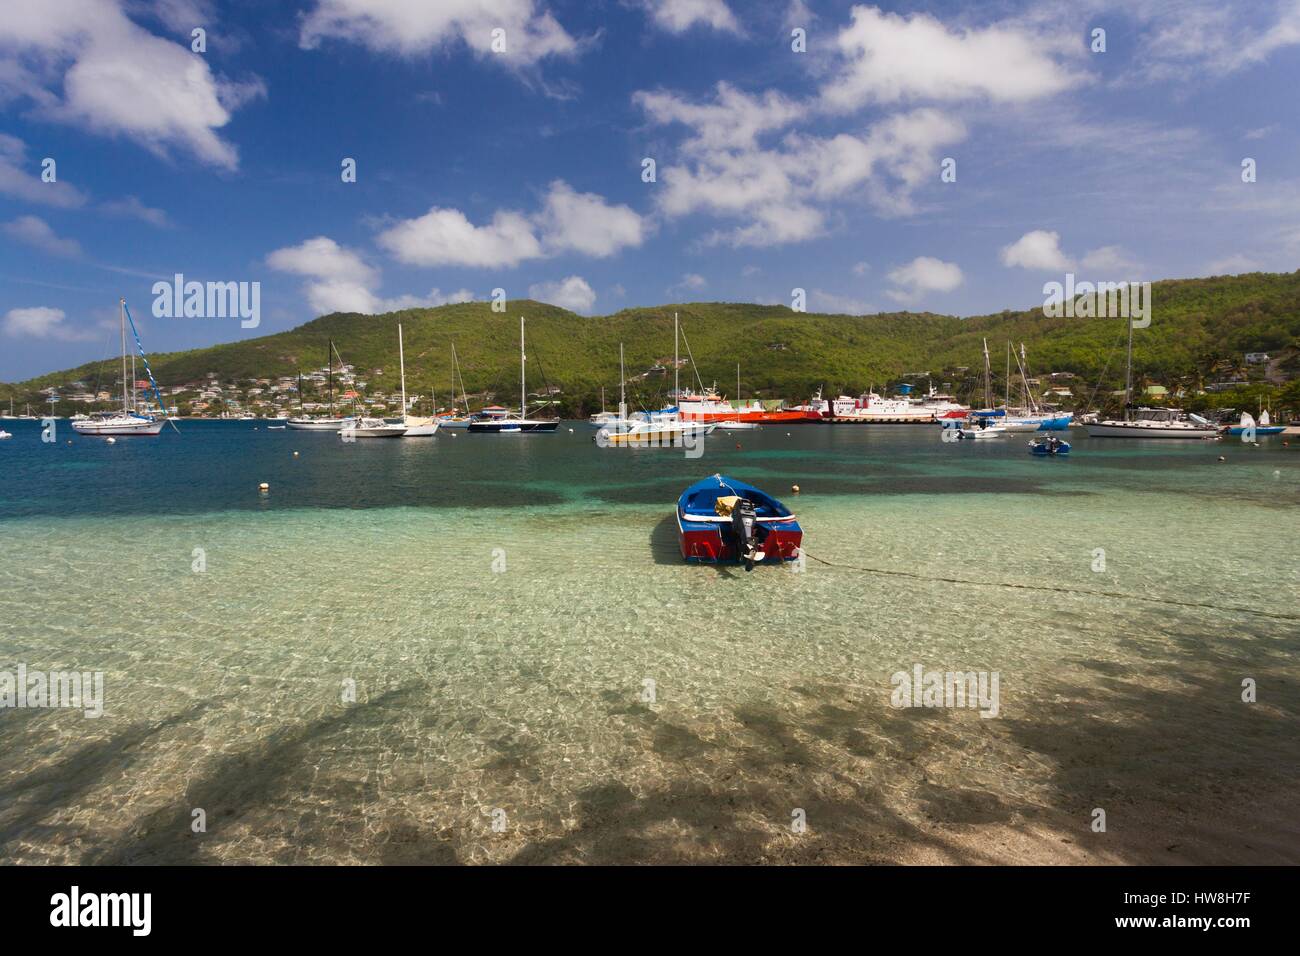 St. Vincent and the Grenadines, Bequia, Port Elizabeth, Admiralty Bay Stock Photo